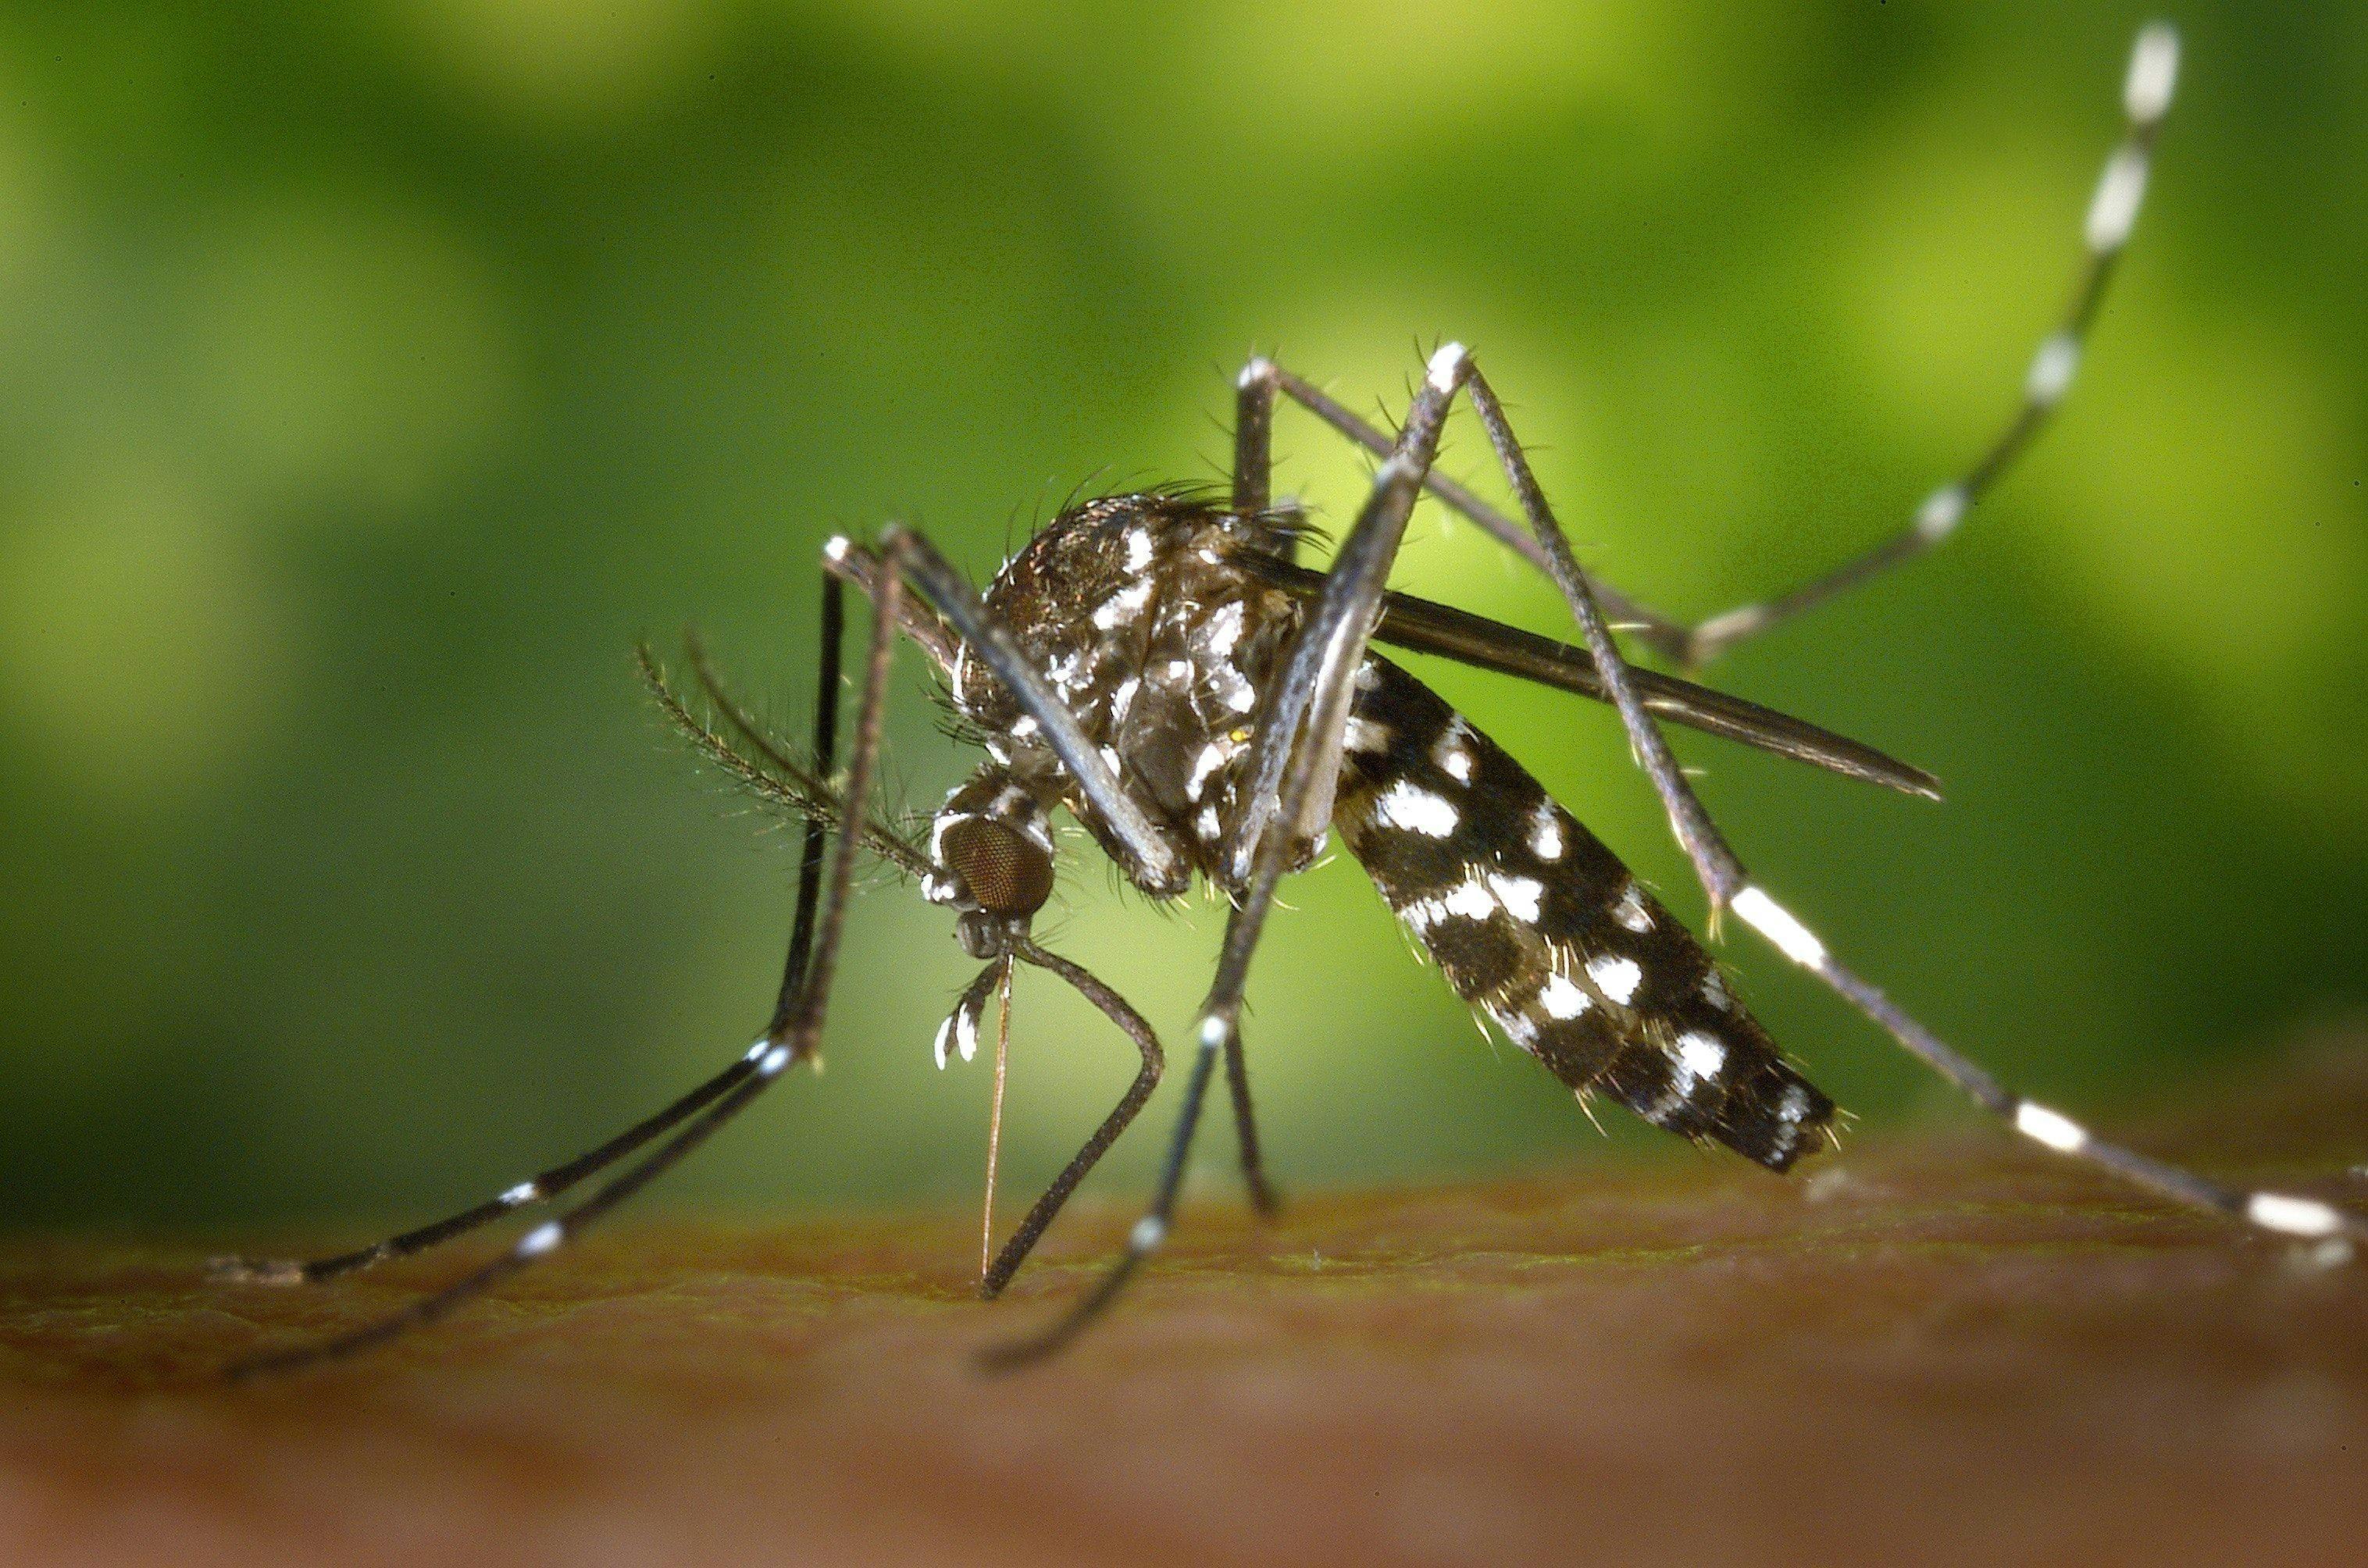 Tiger mosquito detected in Luxembourg